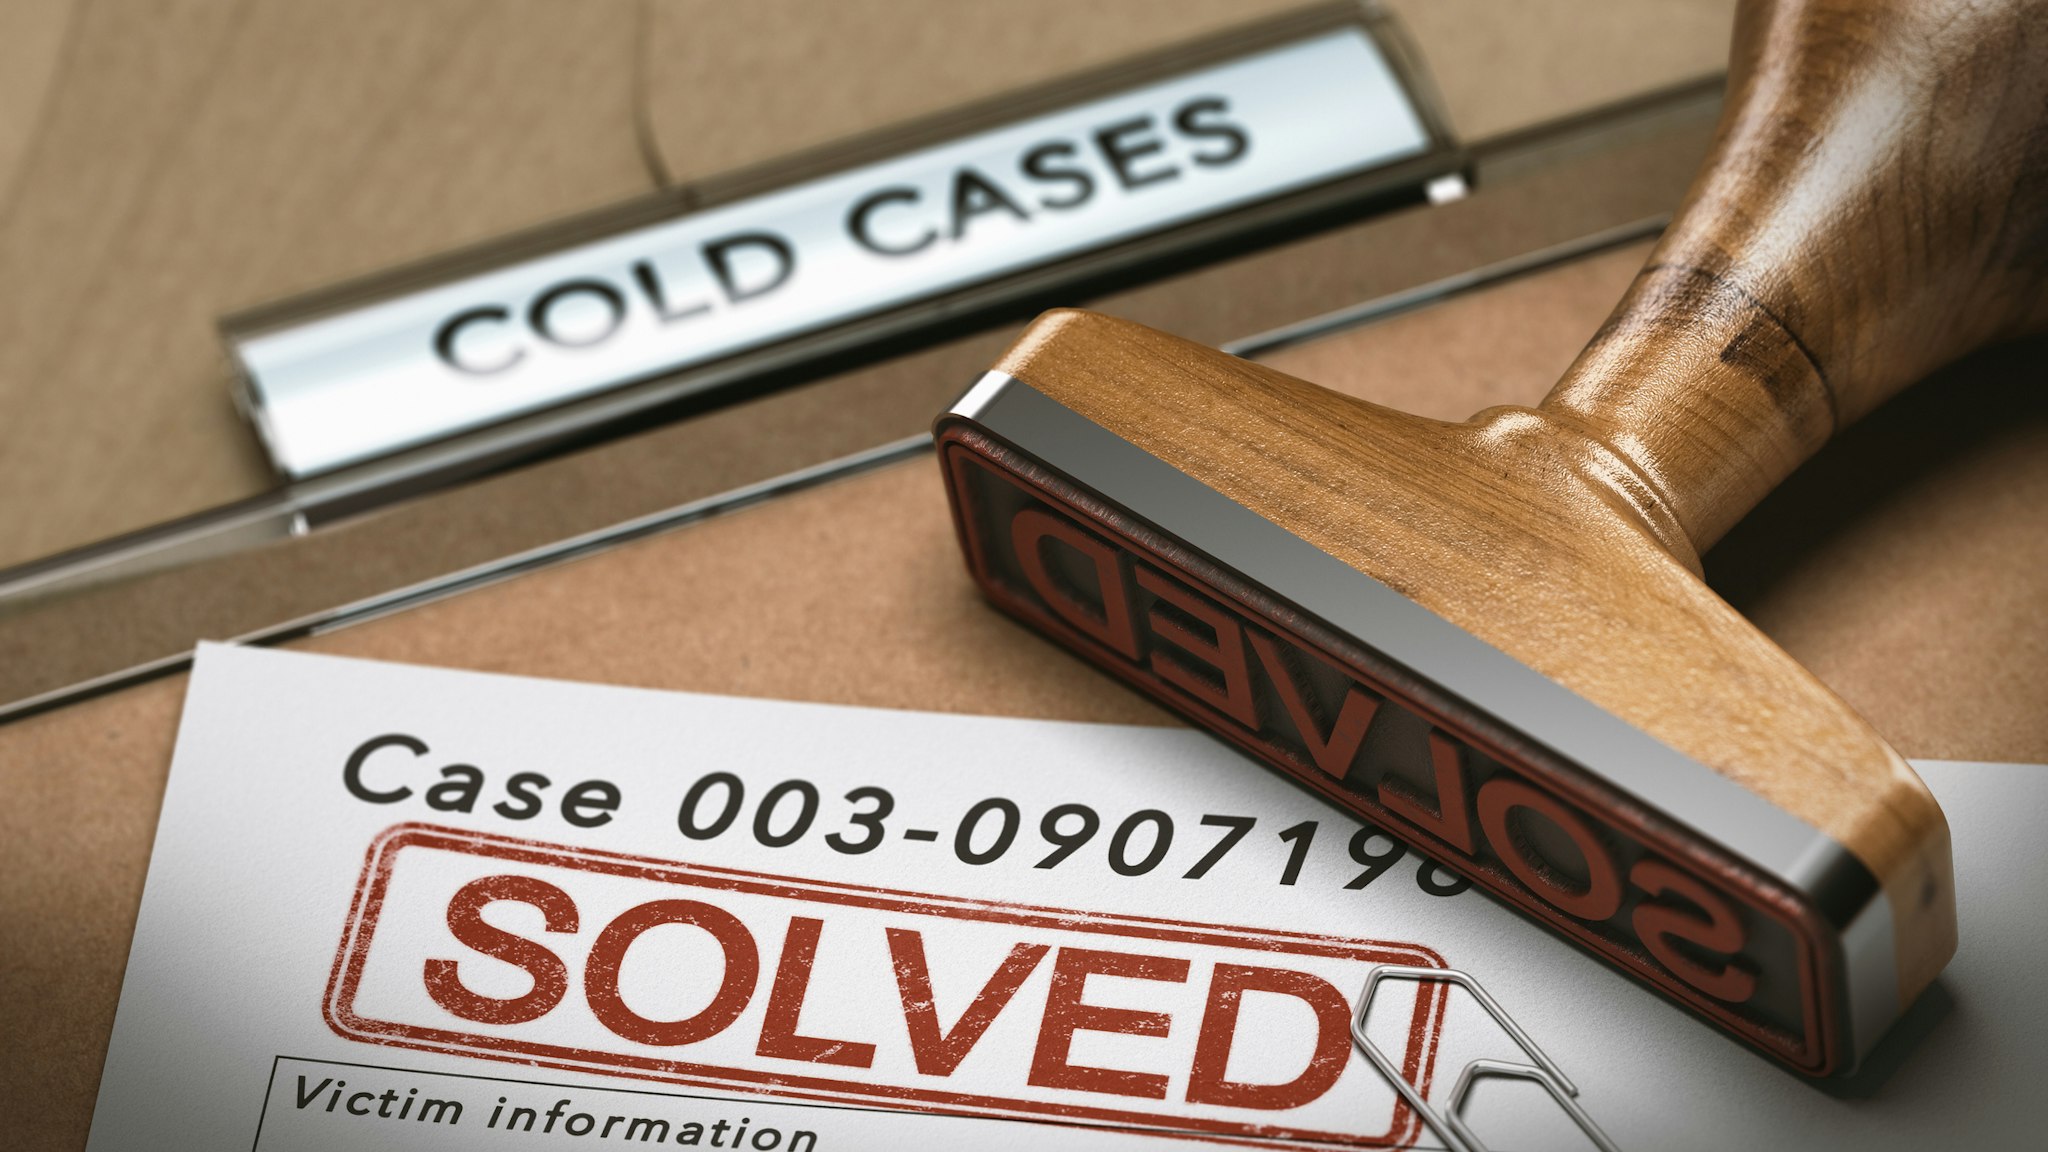 Cold Case Solved, File Closed - stock photo